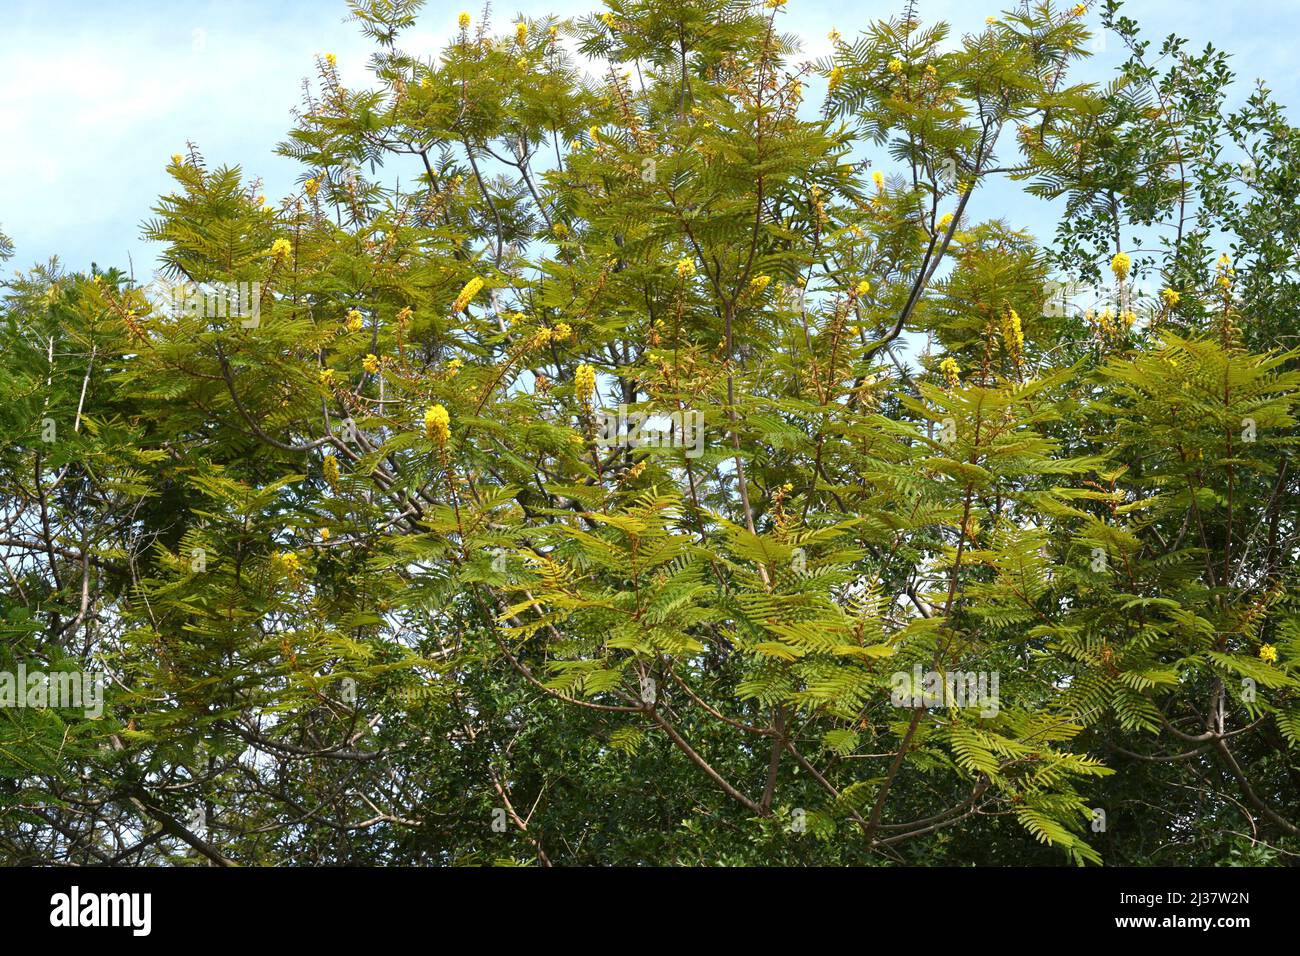 Weeping wattle or african blackwood (Peltophorum africanum) is a deciduous or semi-deciduous tree native to southern Africa. Stock Photo